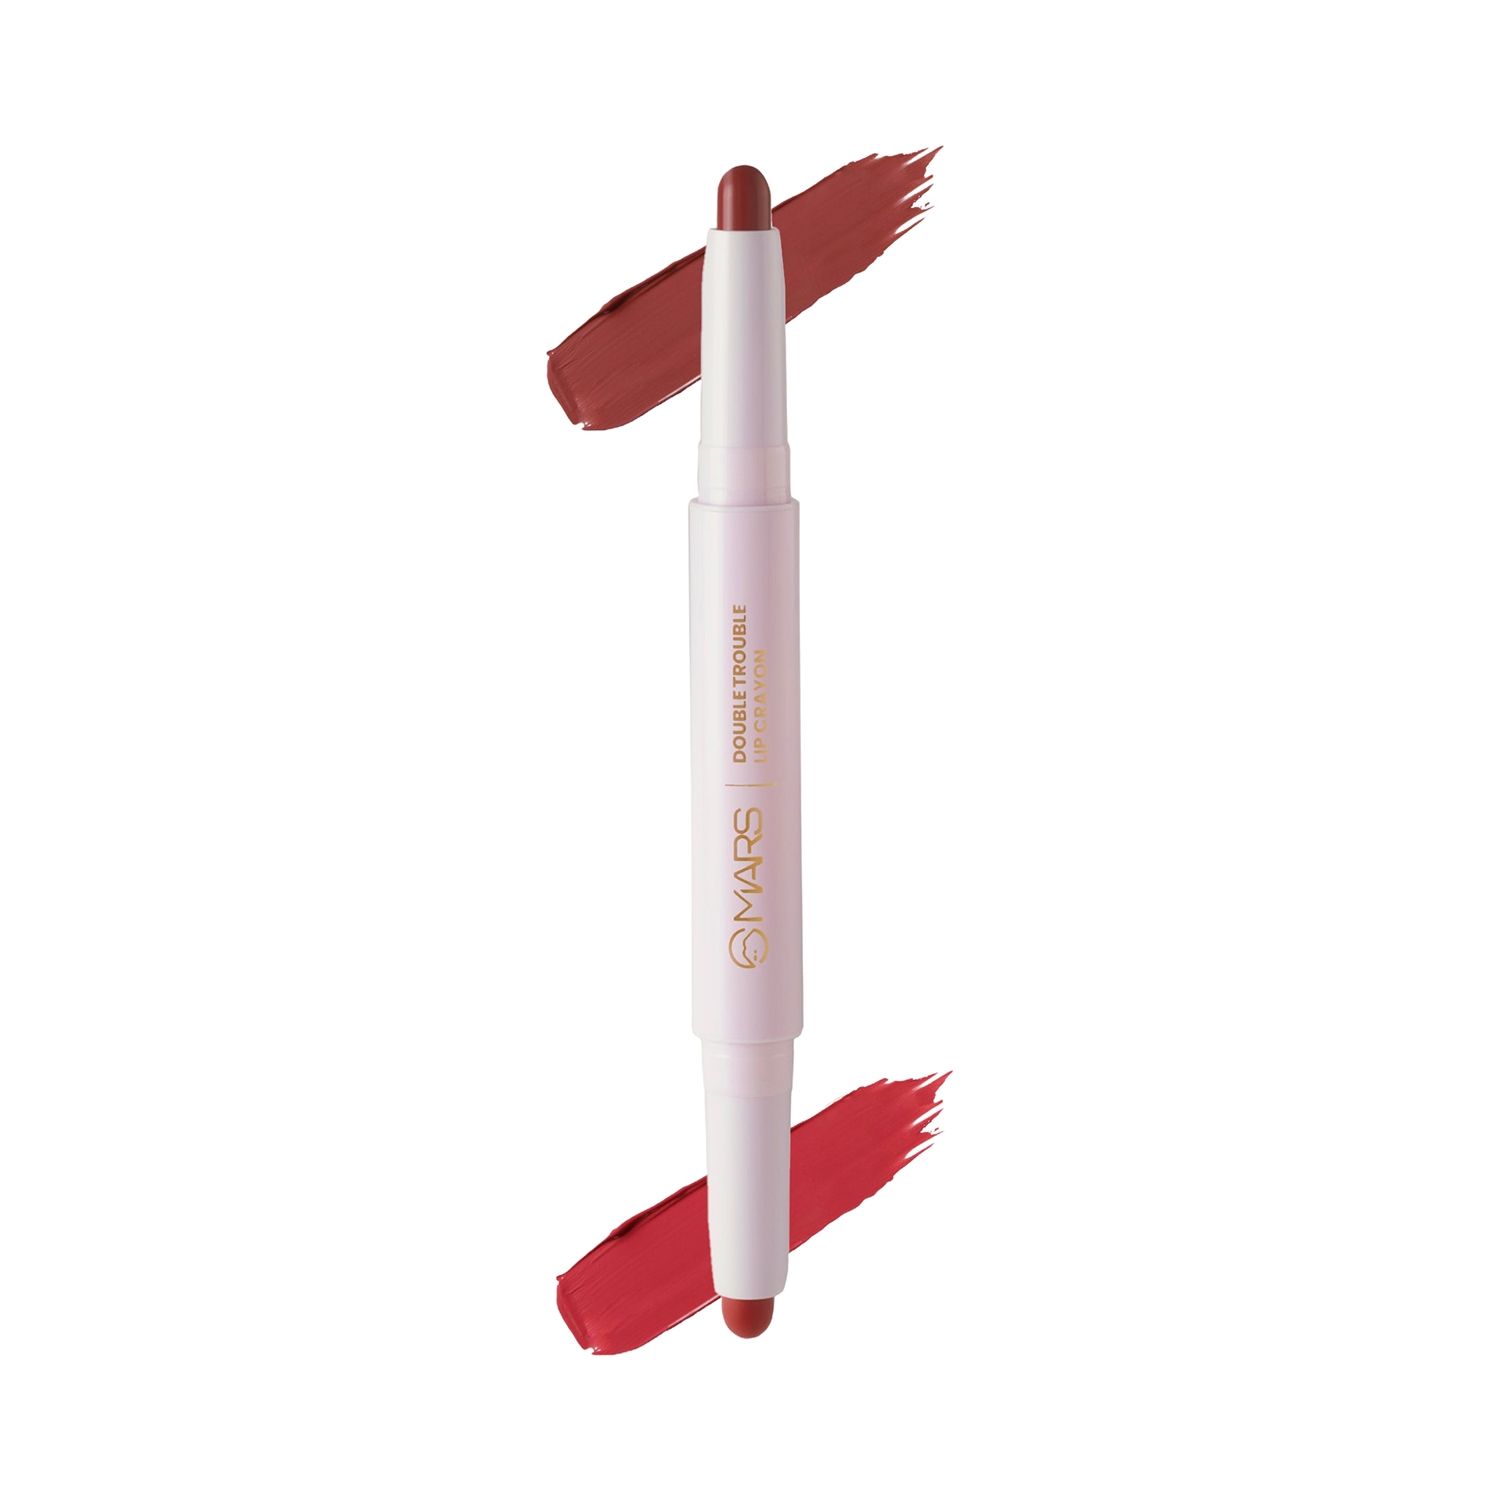 MARS | MARS Double Trouble Lip Crayon - 11 Chili Syrup (4g)